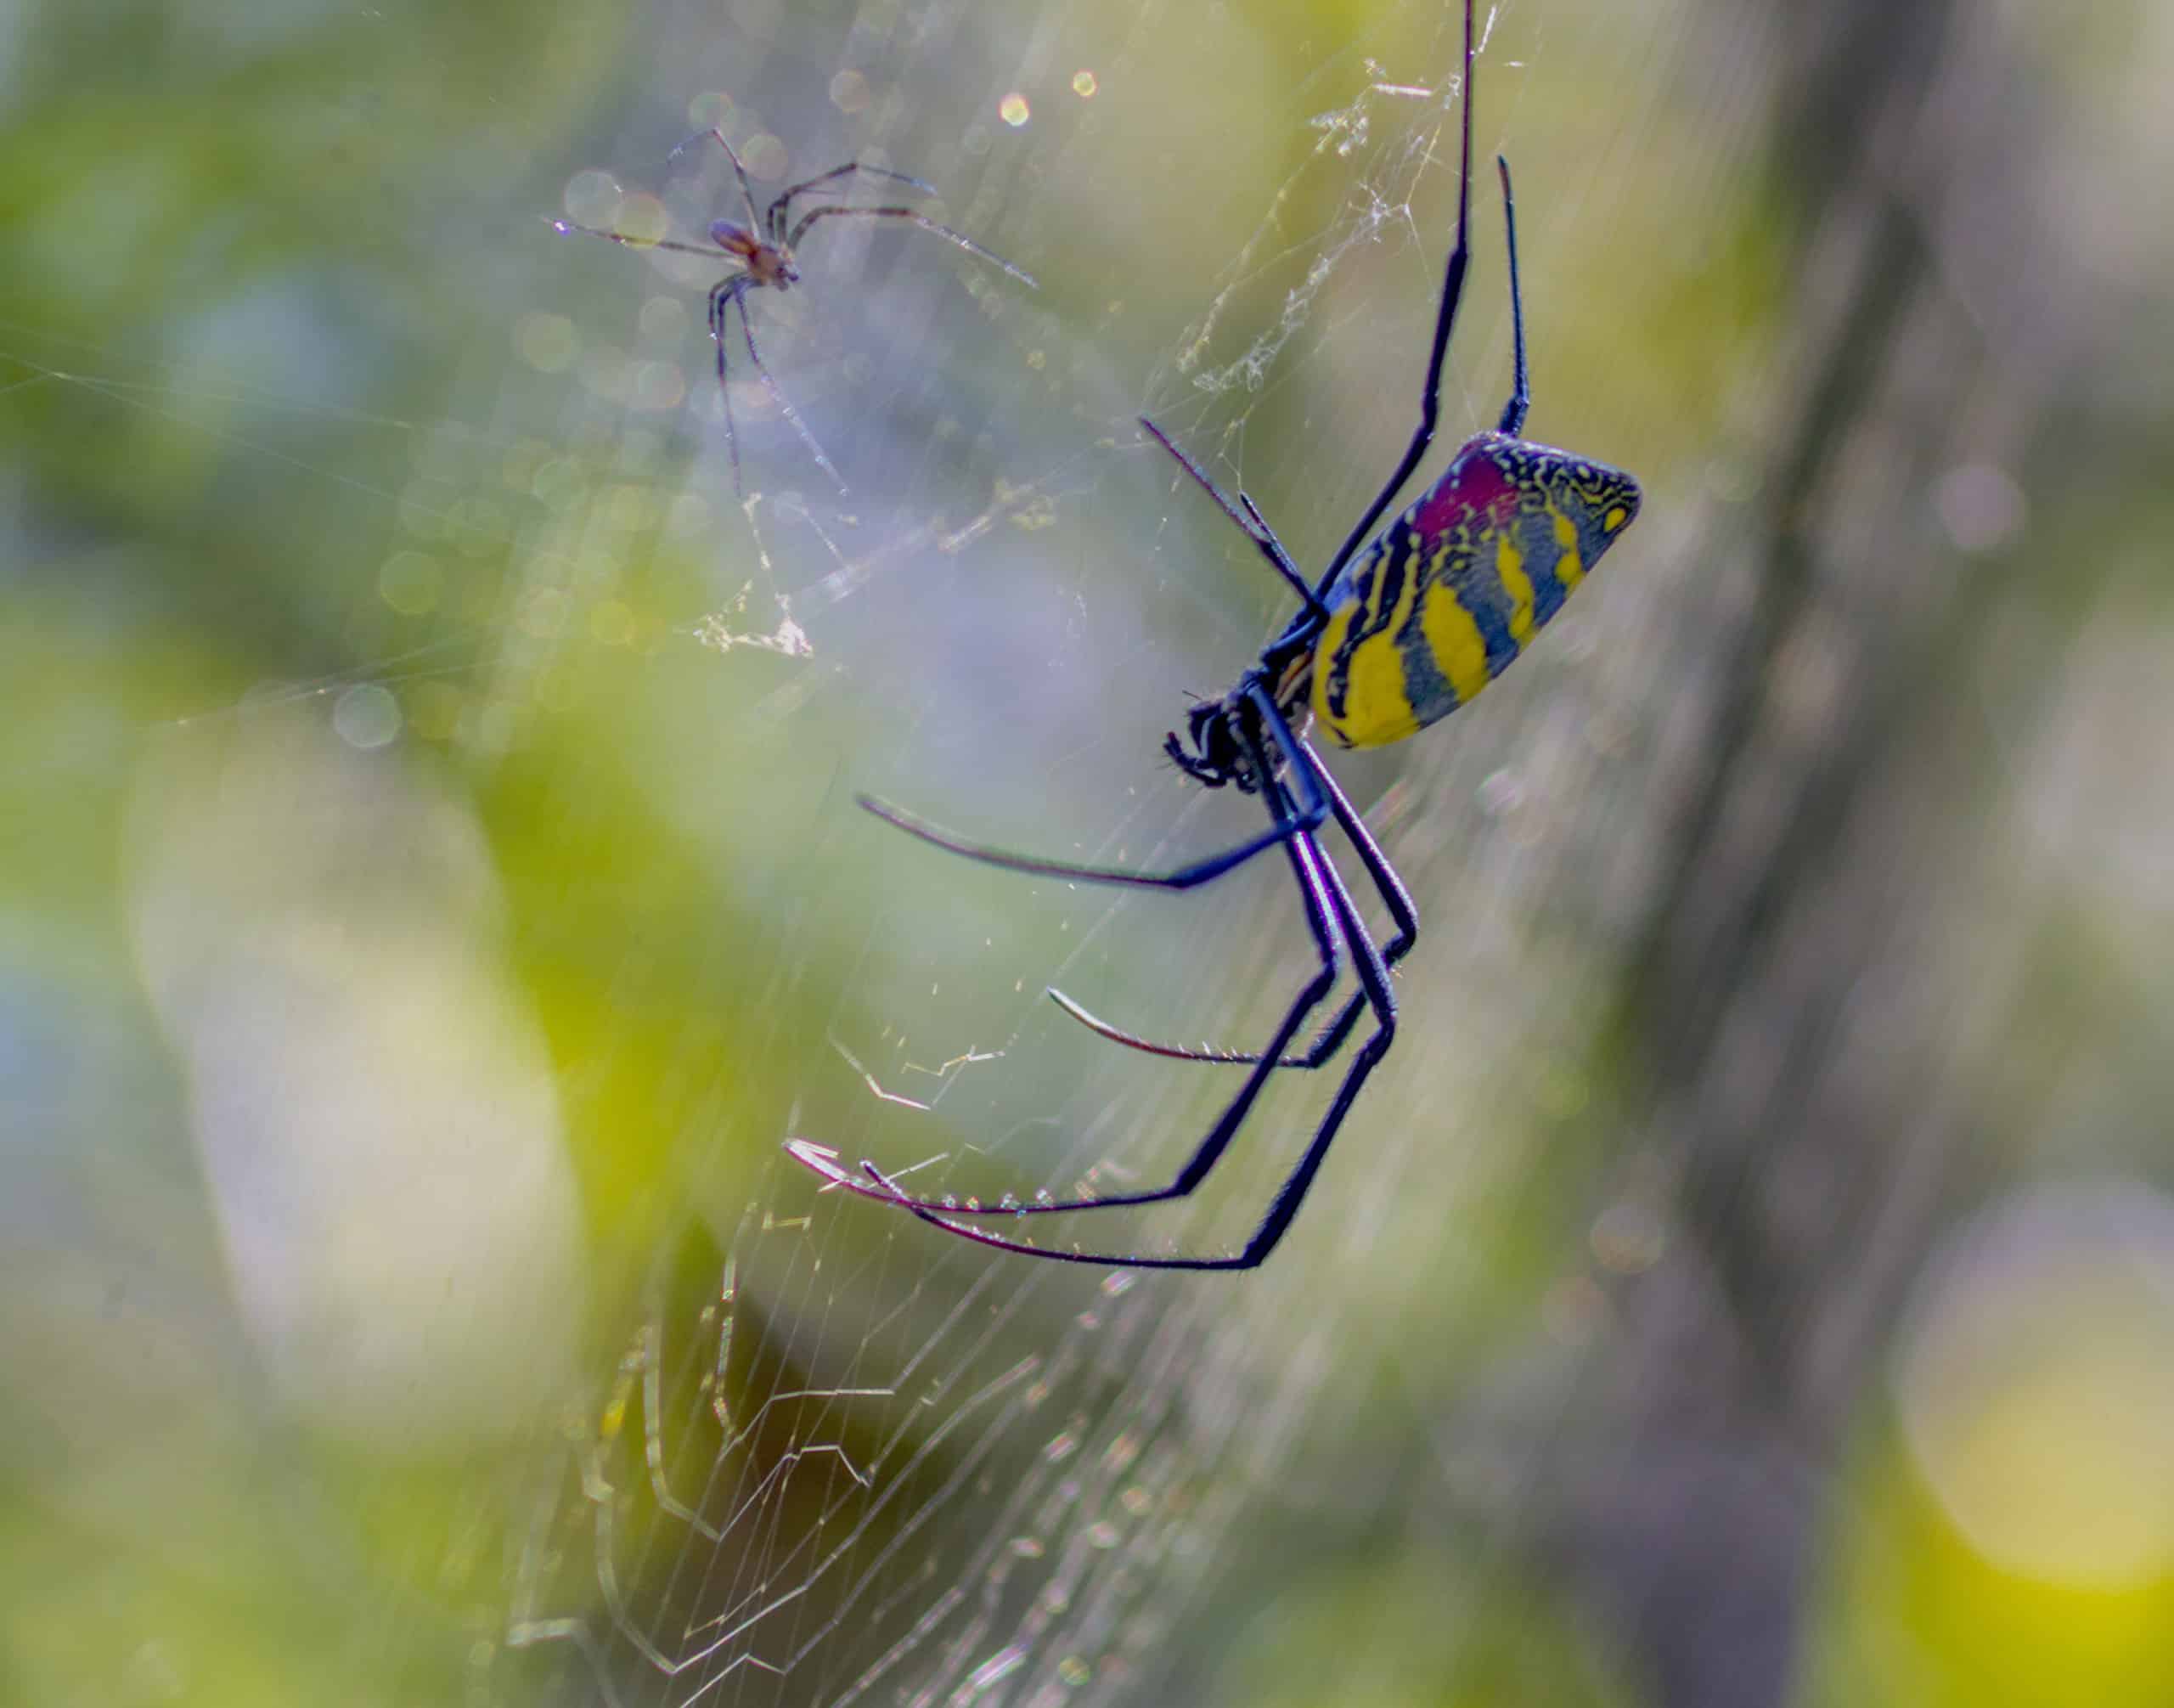 Joro spiders are spreading fast to new US states: Study